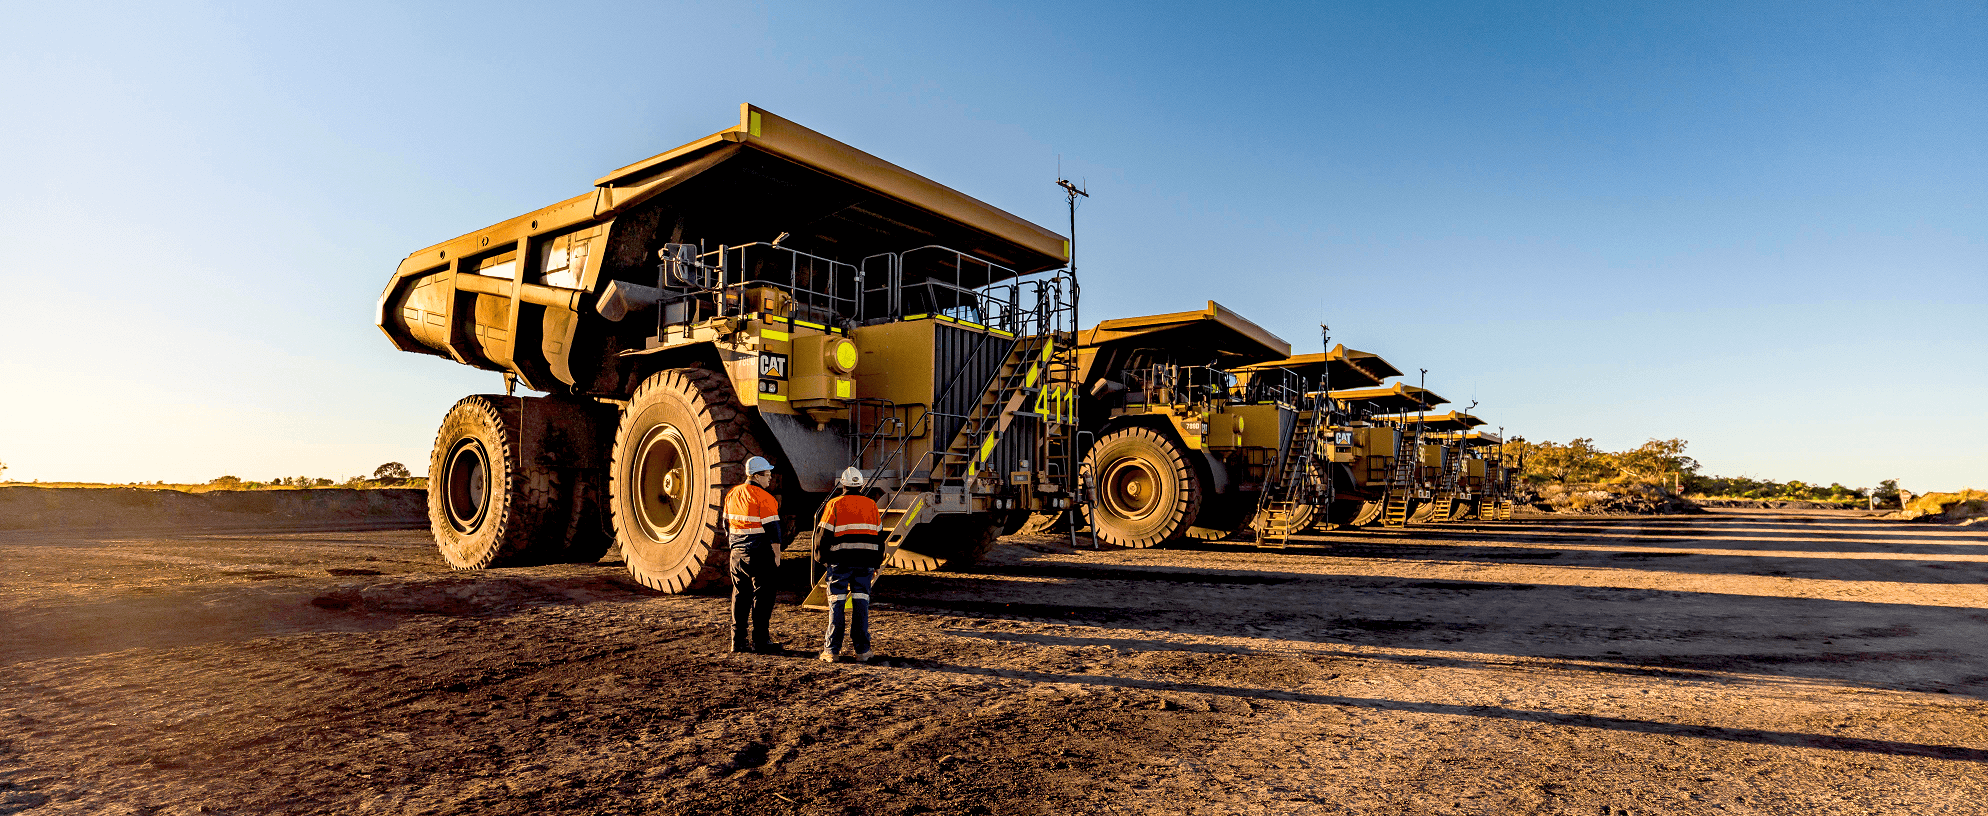 Sound Attenuated Mining Vehicles